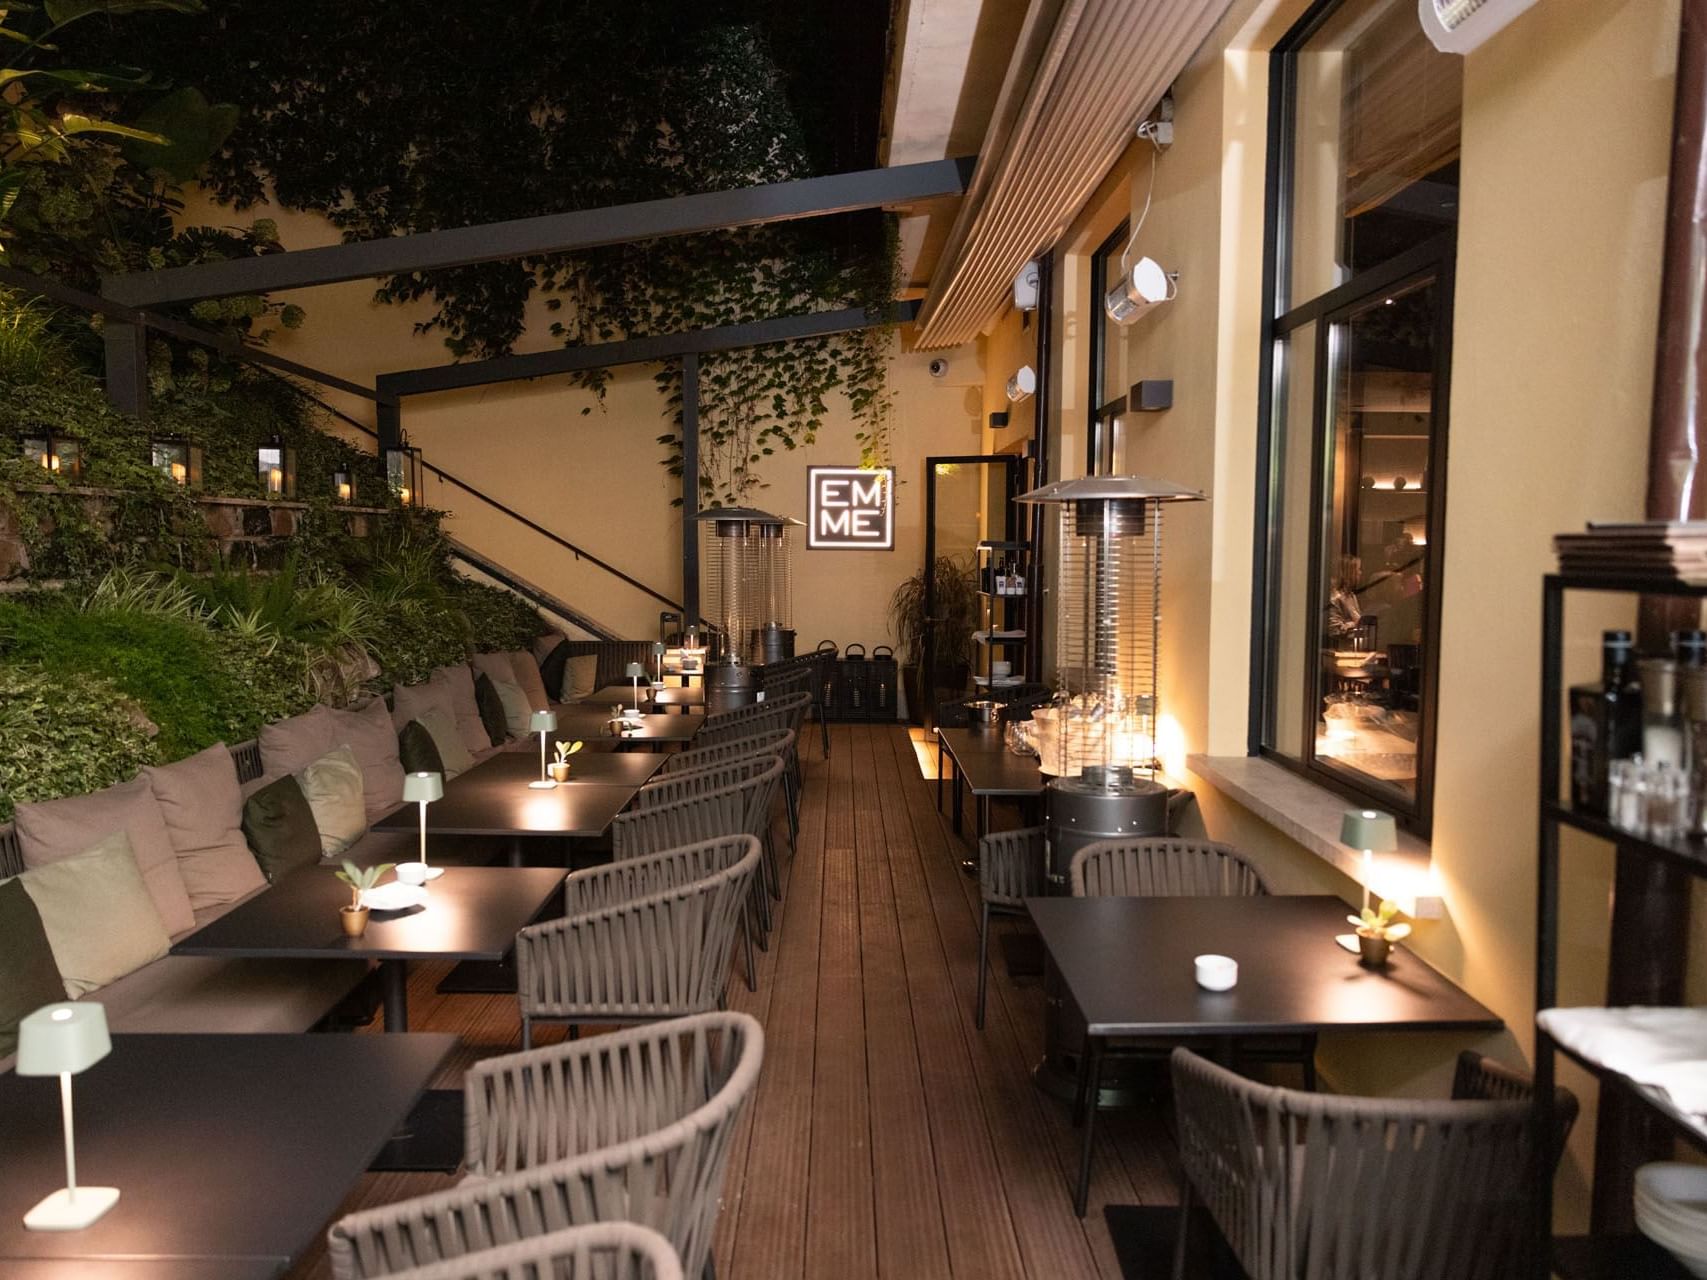 The outdoor dining area at night in EMME Restaurant